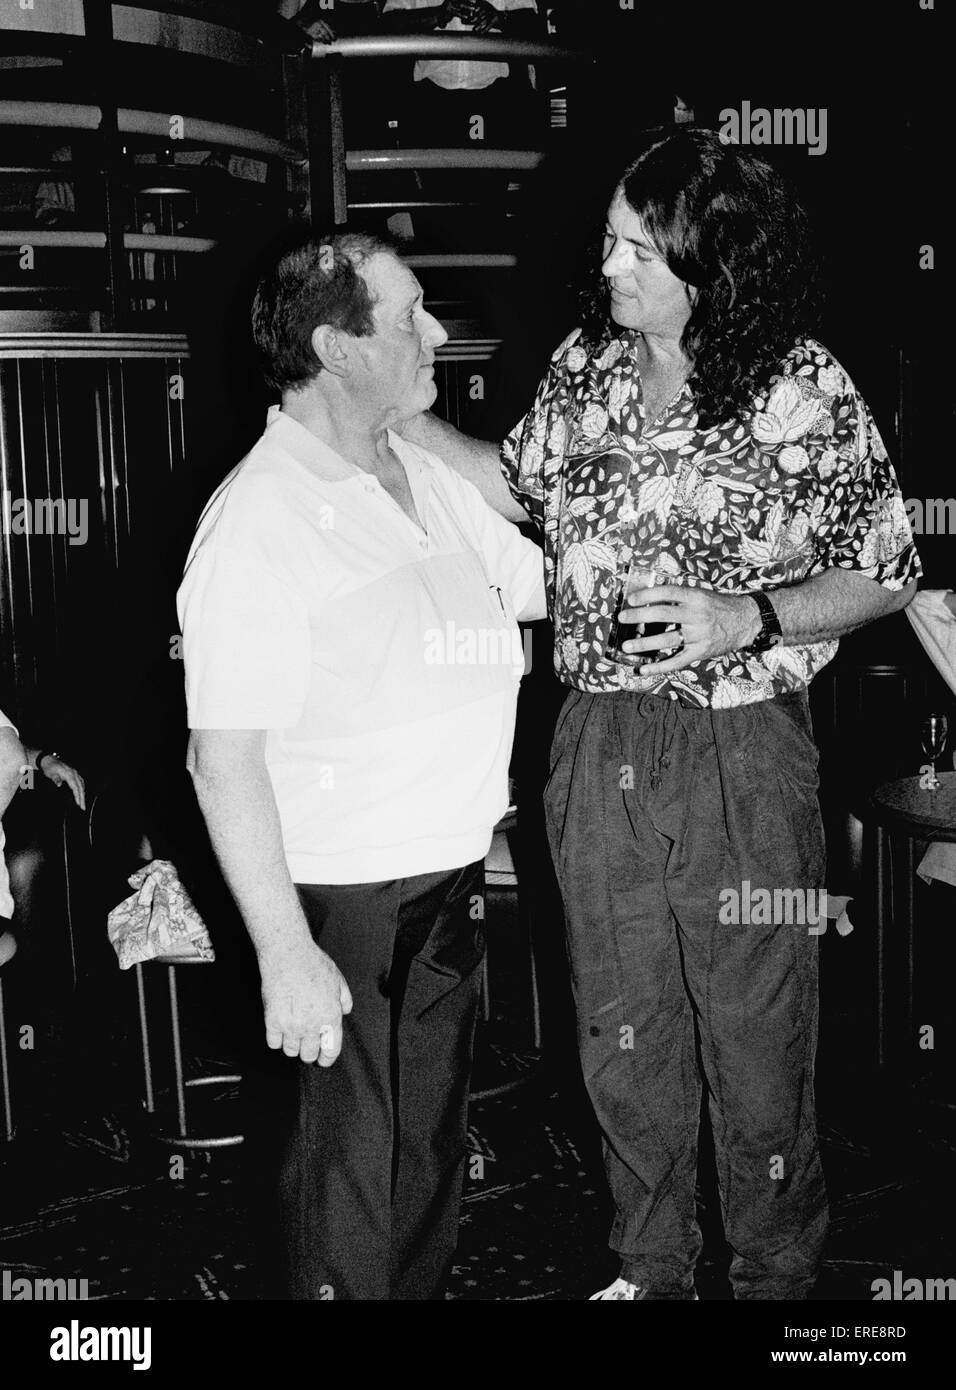 Jim Marshall, OBE (left, b. 1923), founder of Marshall Amplification, is pictured talking with Ian Gillan (b. 1945), singer with the band Deep Purple, at a private function in London in 1988. Jim is known as 'The Father of Loud'. Stock Photo